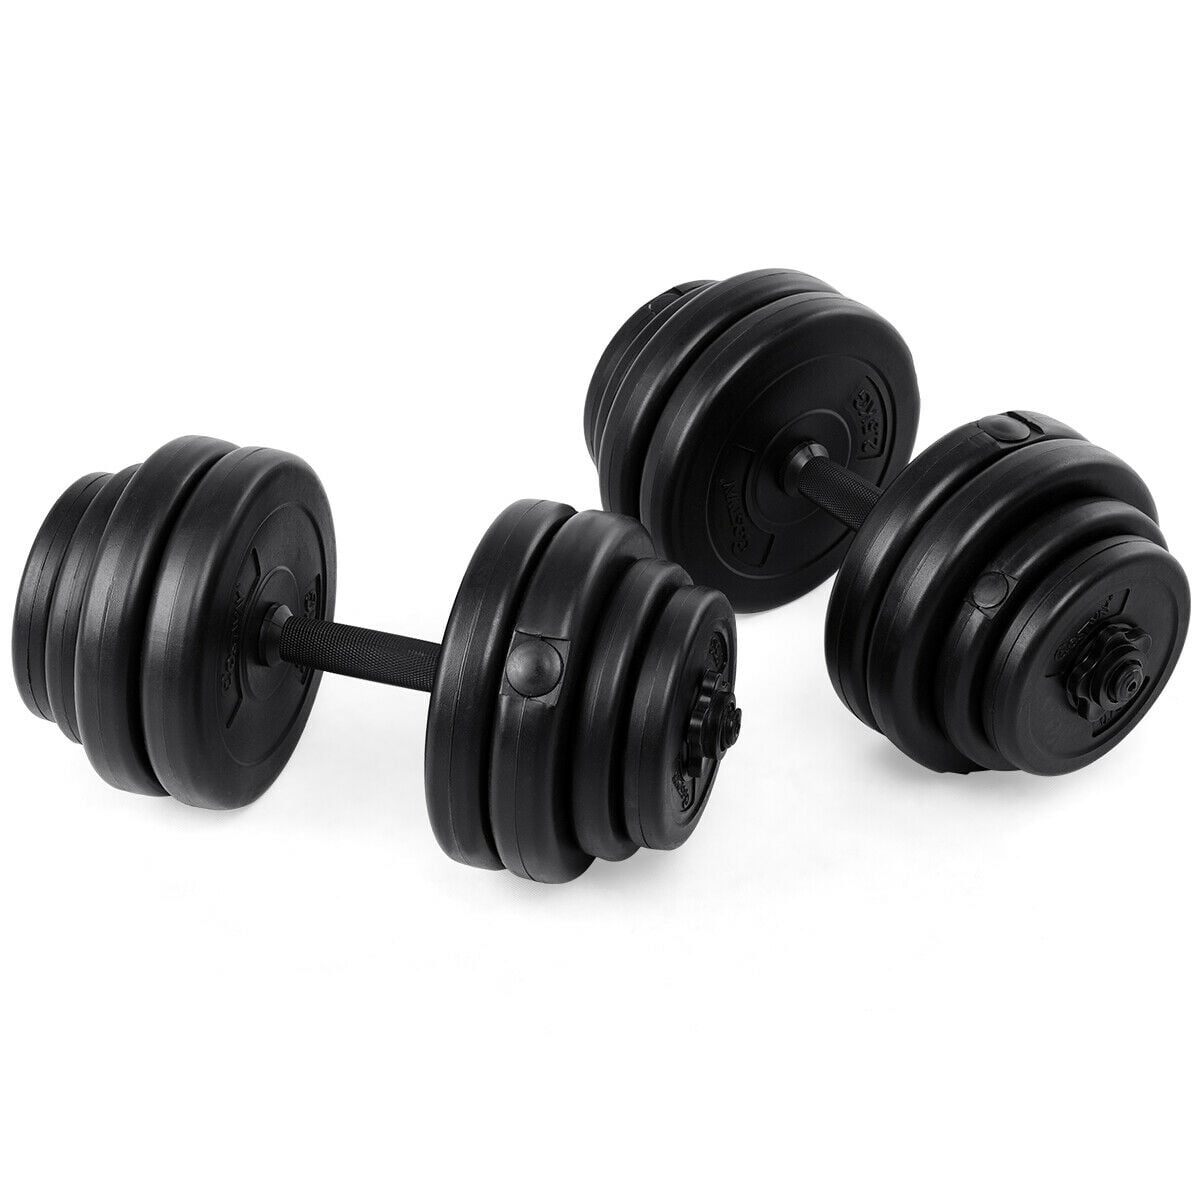 10-50lb  Weight Dumbbell Set Cap Gym Barbell Plates Body Workout Home Workout 